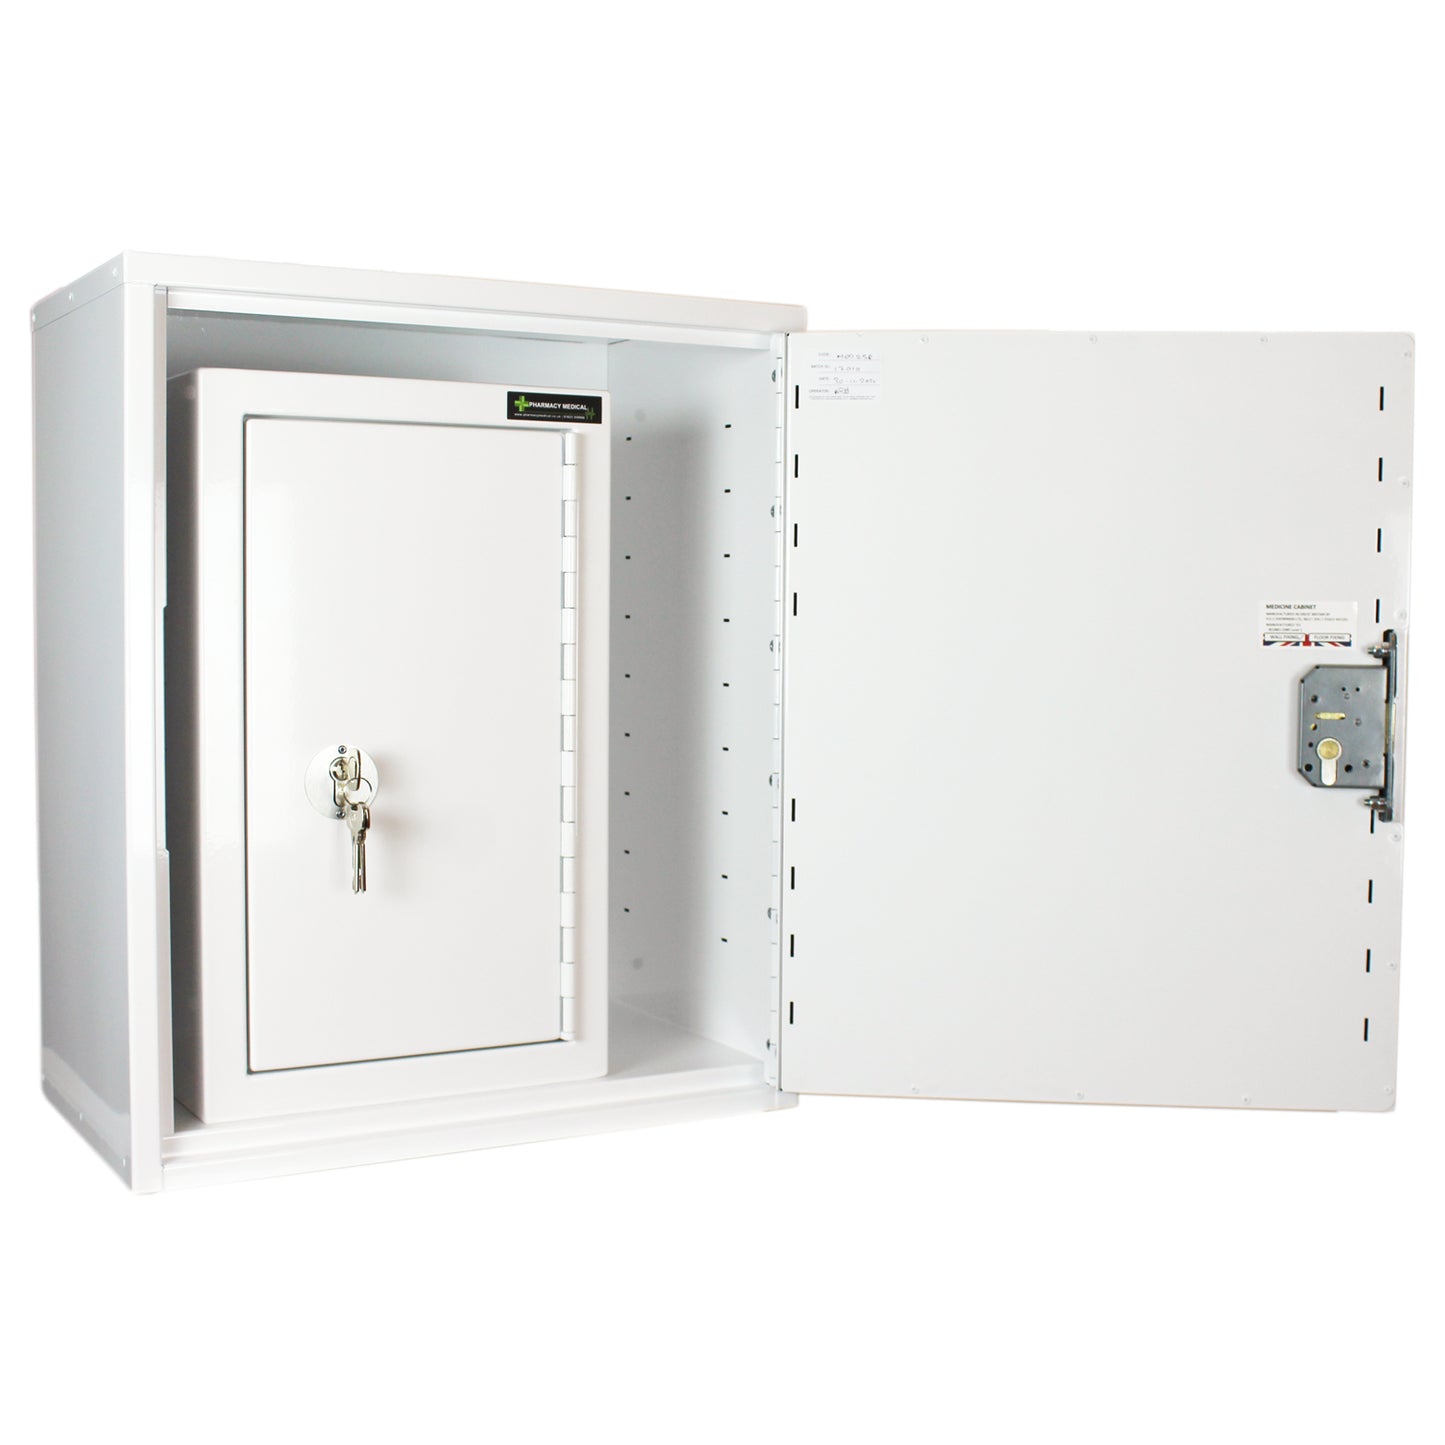 Pharmacy Medical - HECCMC250A MEDICINE / DRUGS CABINET 600 X 500 X 300mm | SINGLE DOOR, 2 FULL DEPTH SHELVES | R/H HINGE - with internal: CONTROLLED DRUGS CABINET S, M or L | 1 SHELF (Removable) | R/H HINGE